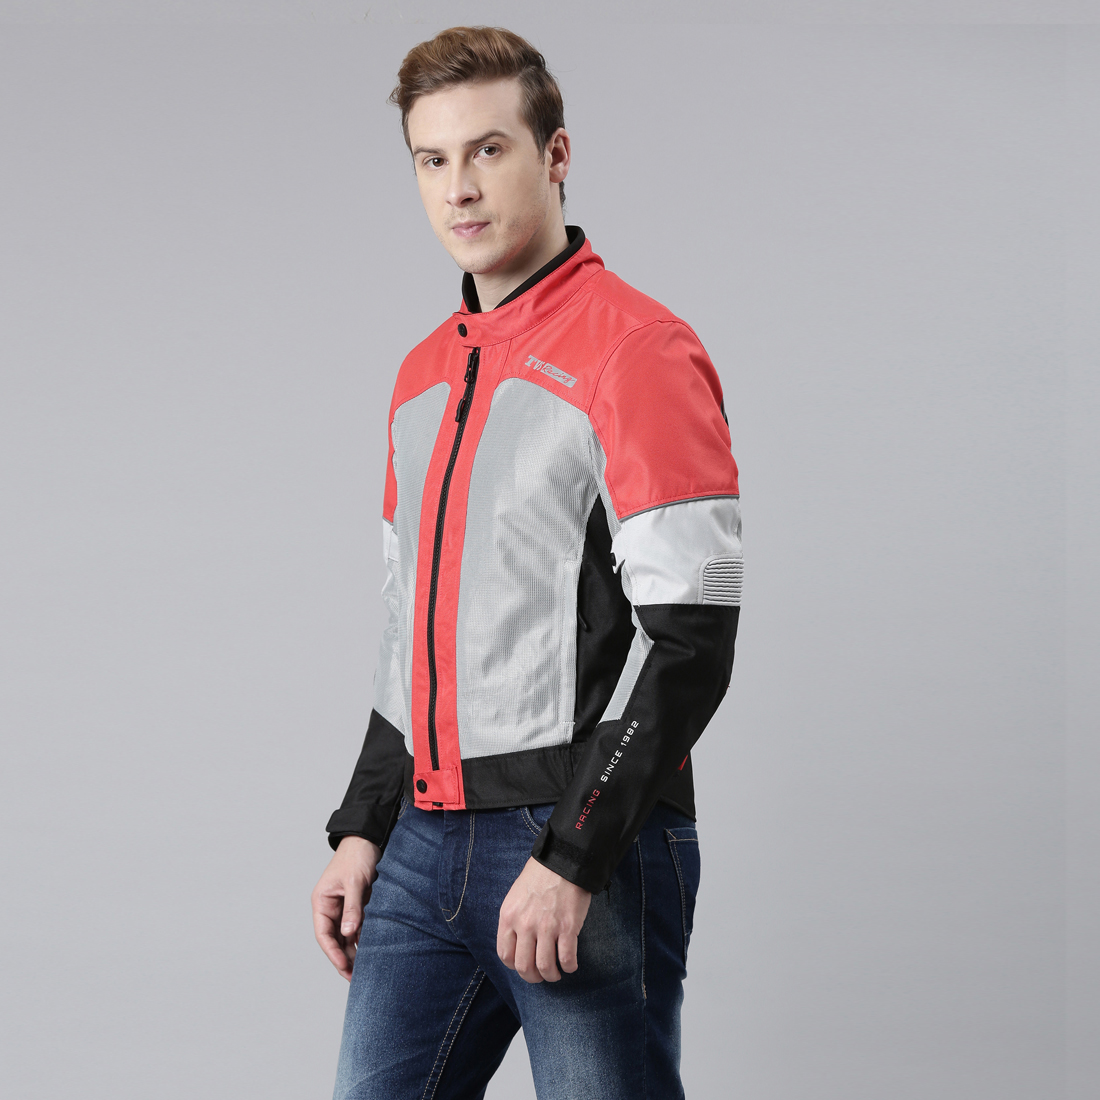  TVS Racing Road Zipper Riding Jacket for Men- High Abrasion 600D Polyester, CE Level 2 Armour Protection – Essential Bike Jacket for Bikers (Red)